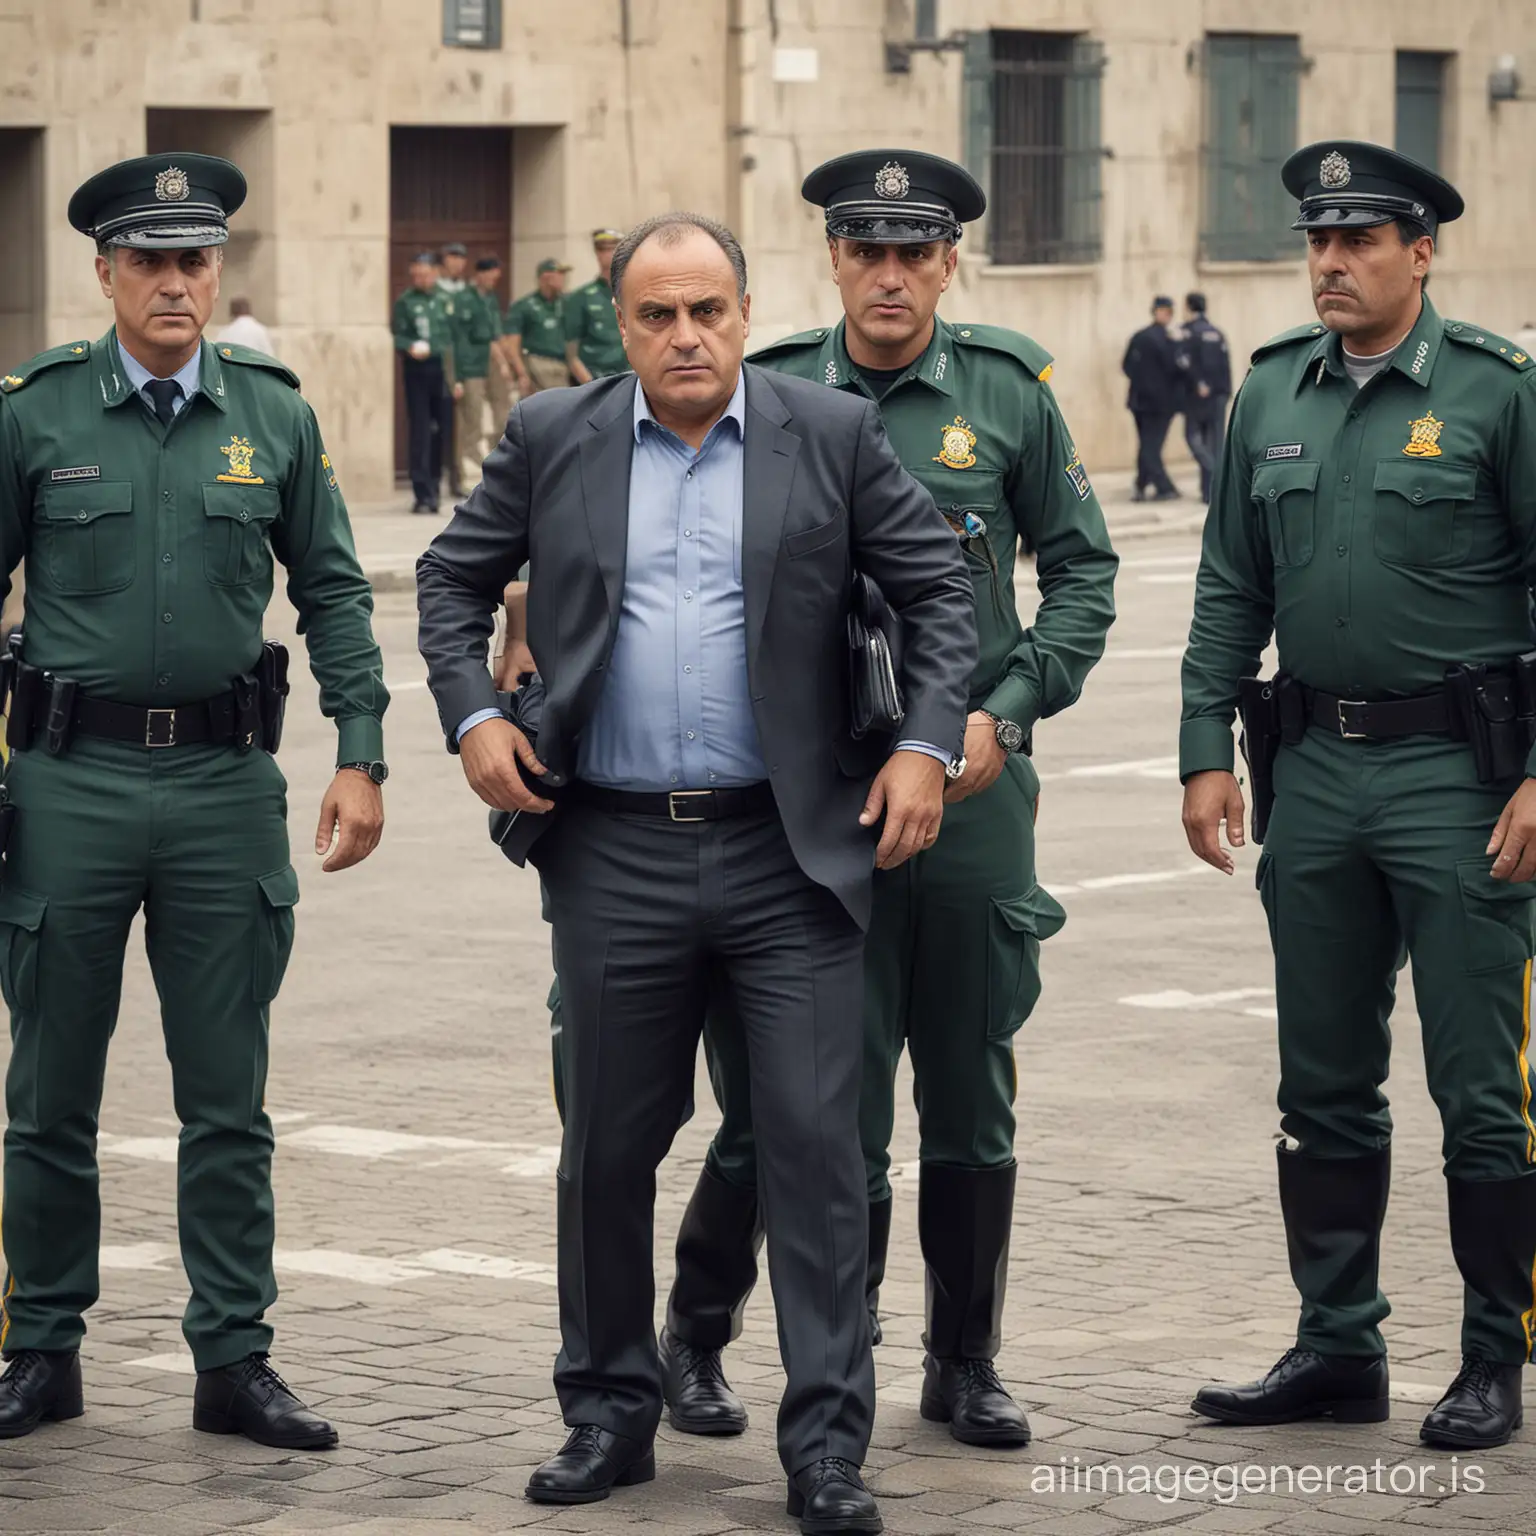 Hyperrealistic image of the leader of the Spanish soccer league, Javier Tebas Medrano, being arrested by the Spanish Guardia Civil